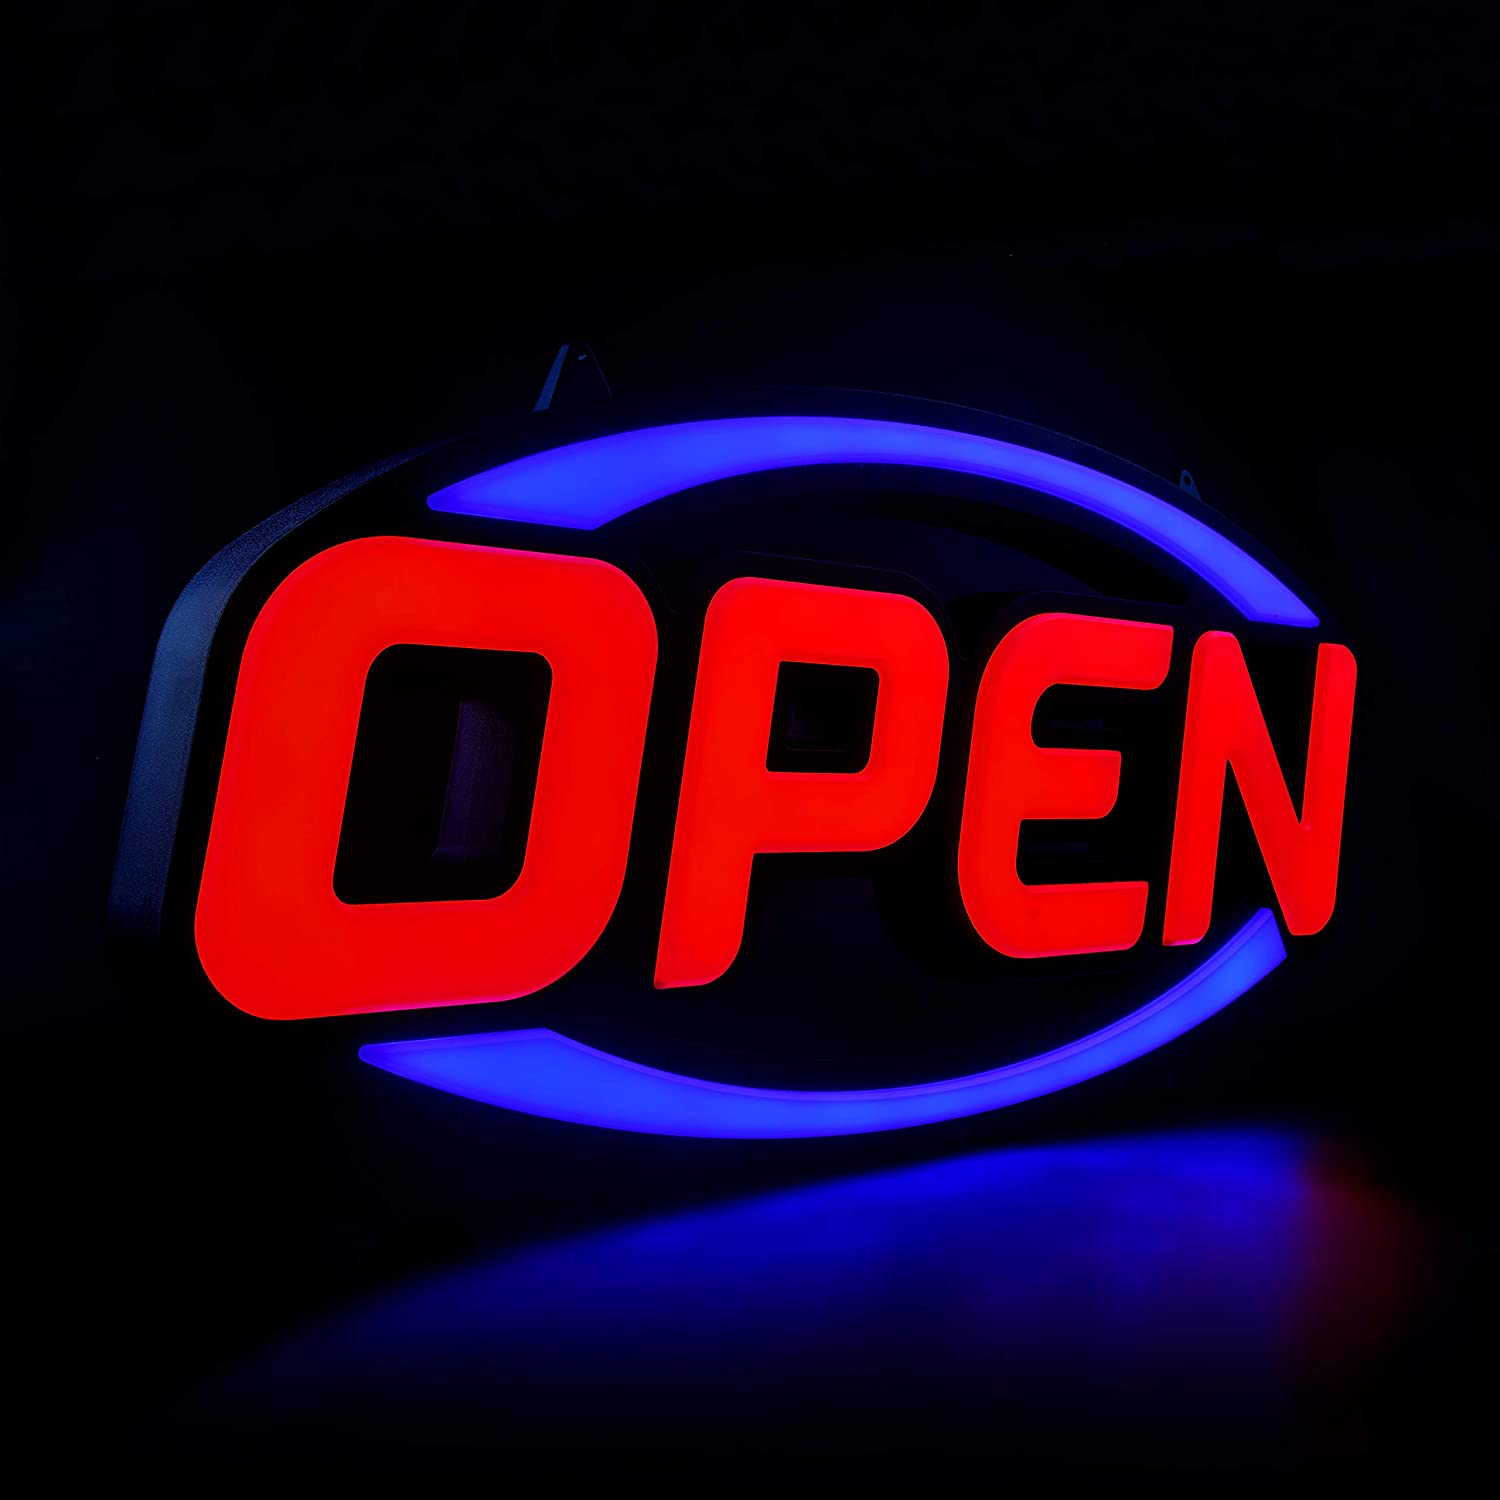 GreenCube Remote Controlled LED Open Sign, 32×16-Inch